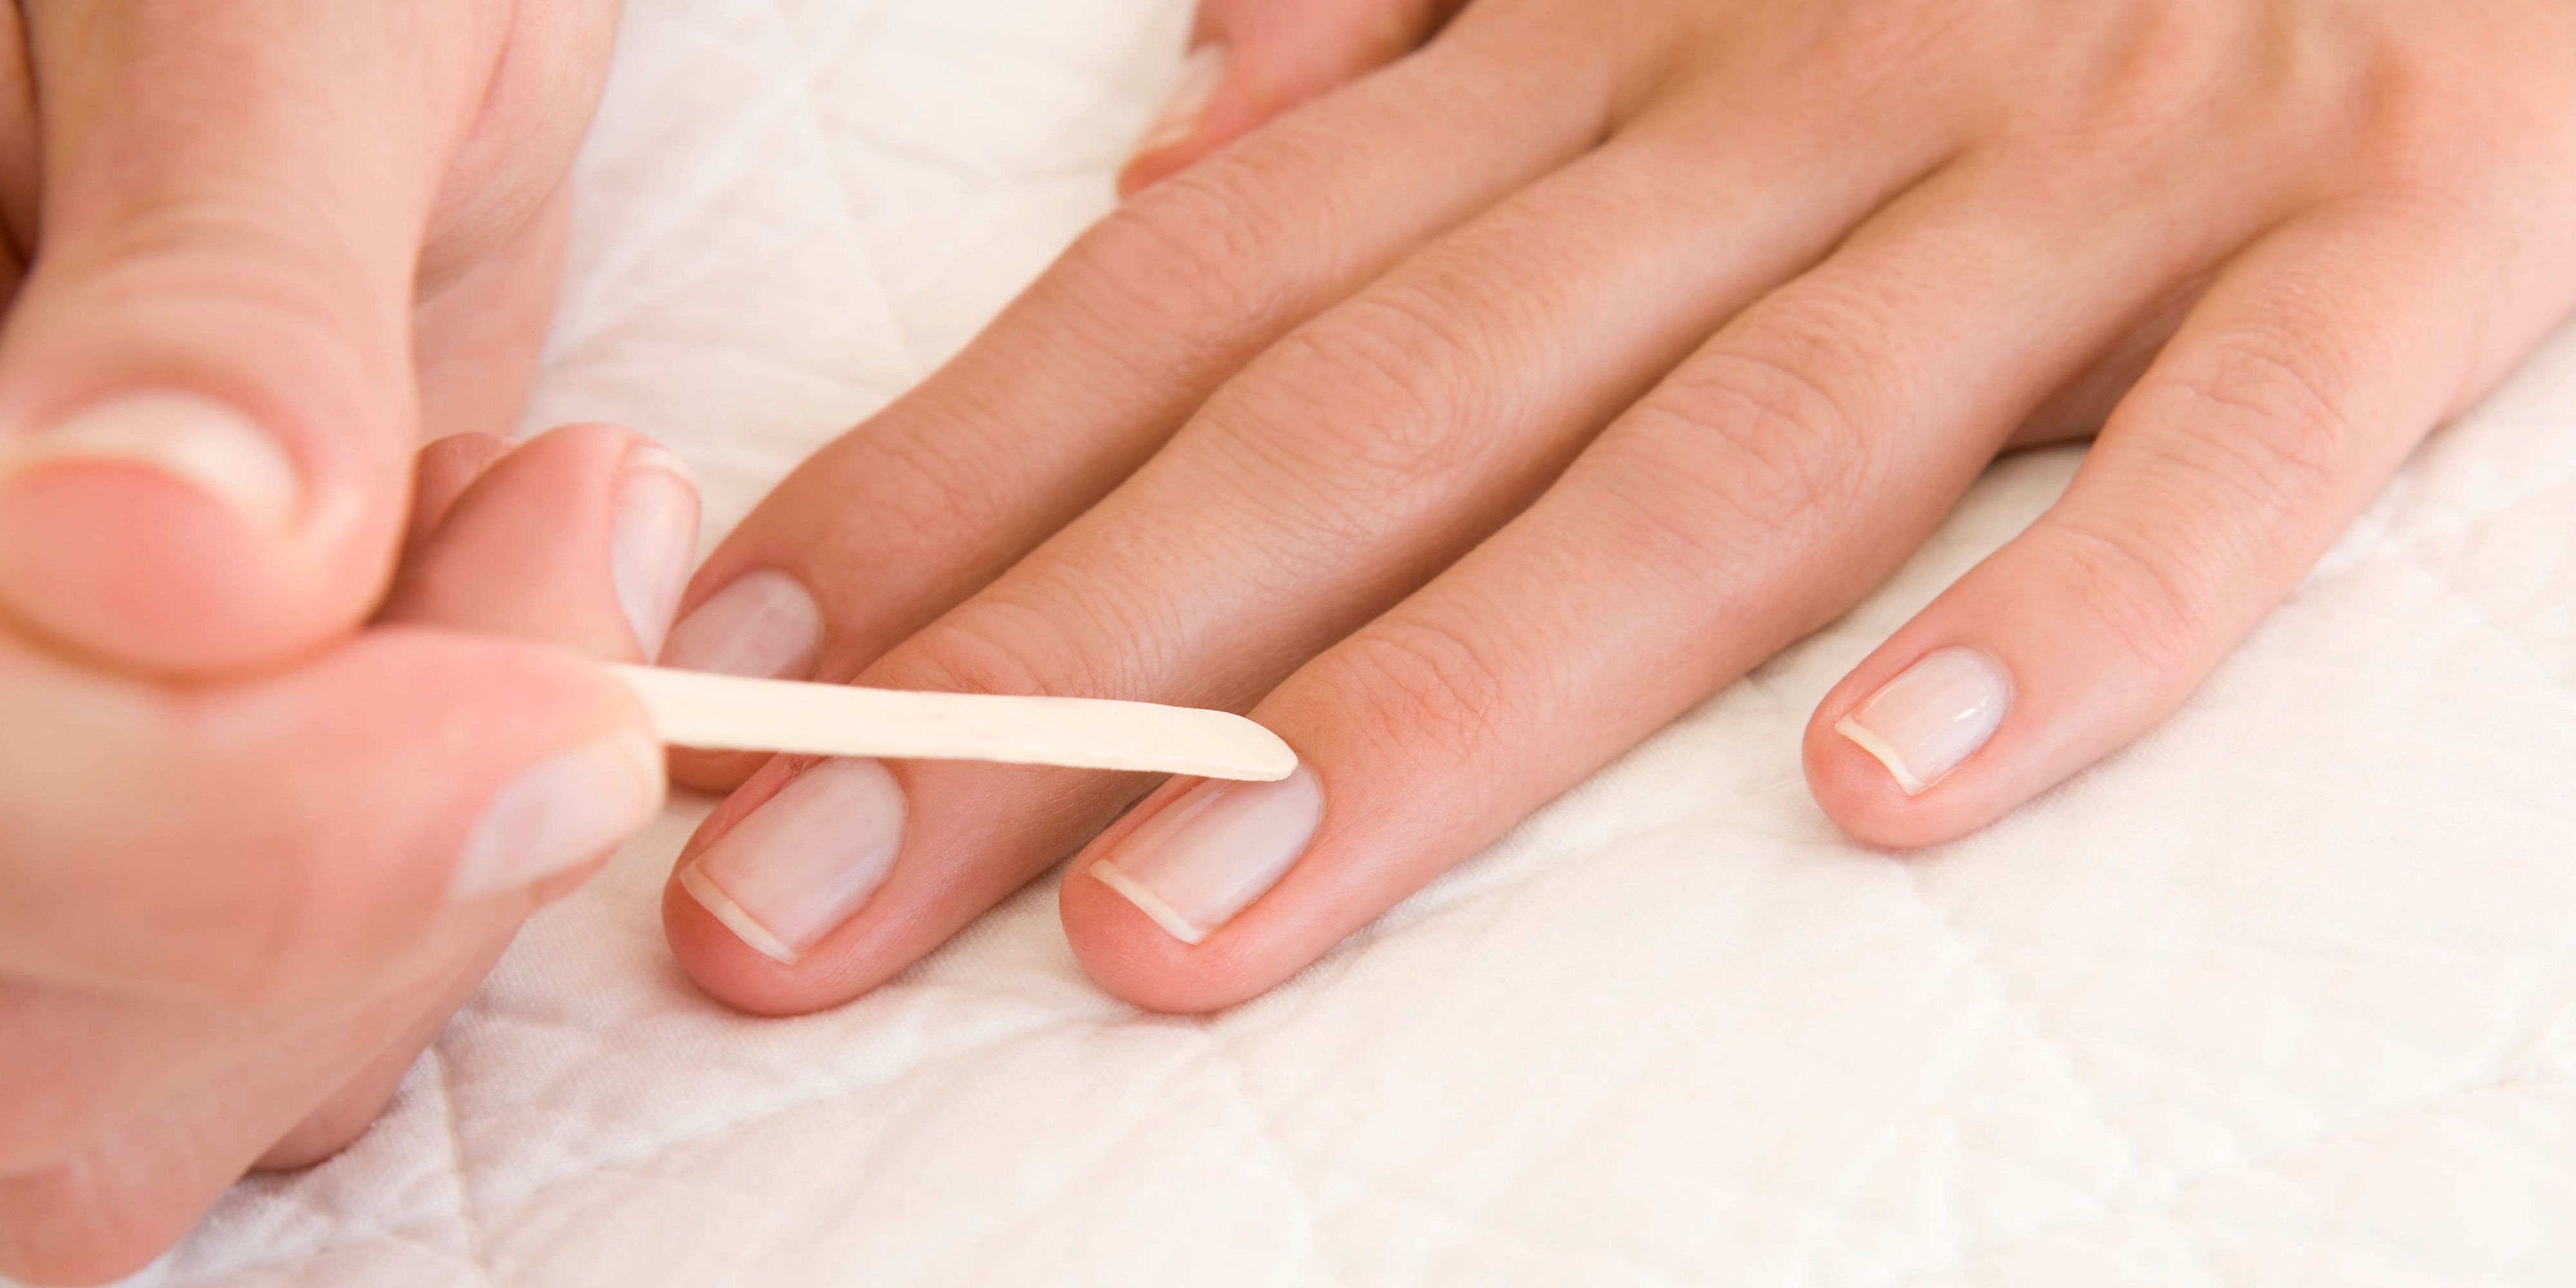 Medanta | What Your Nails Say About Your Health